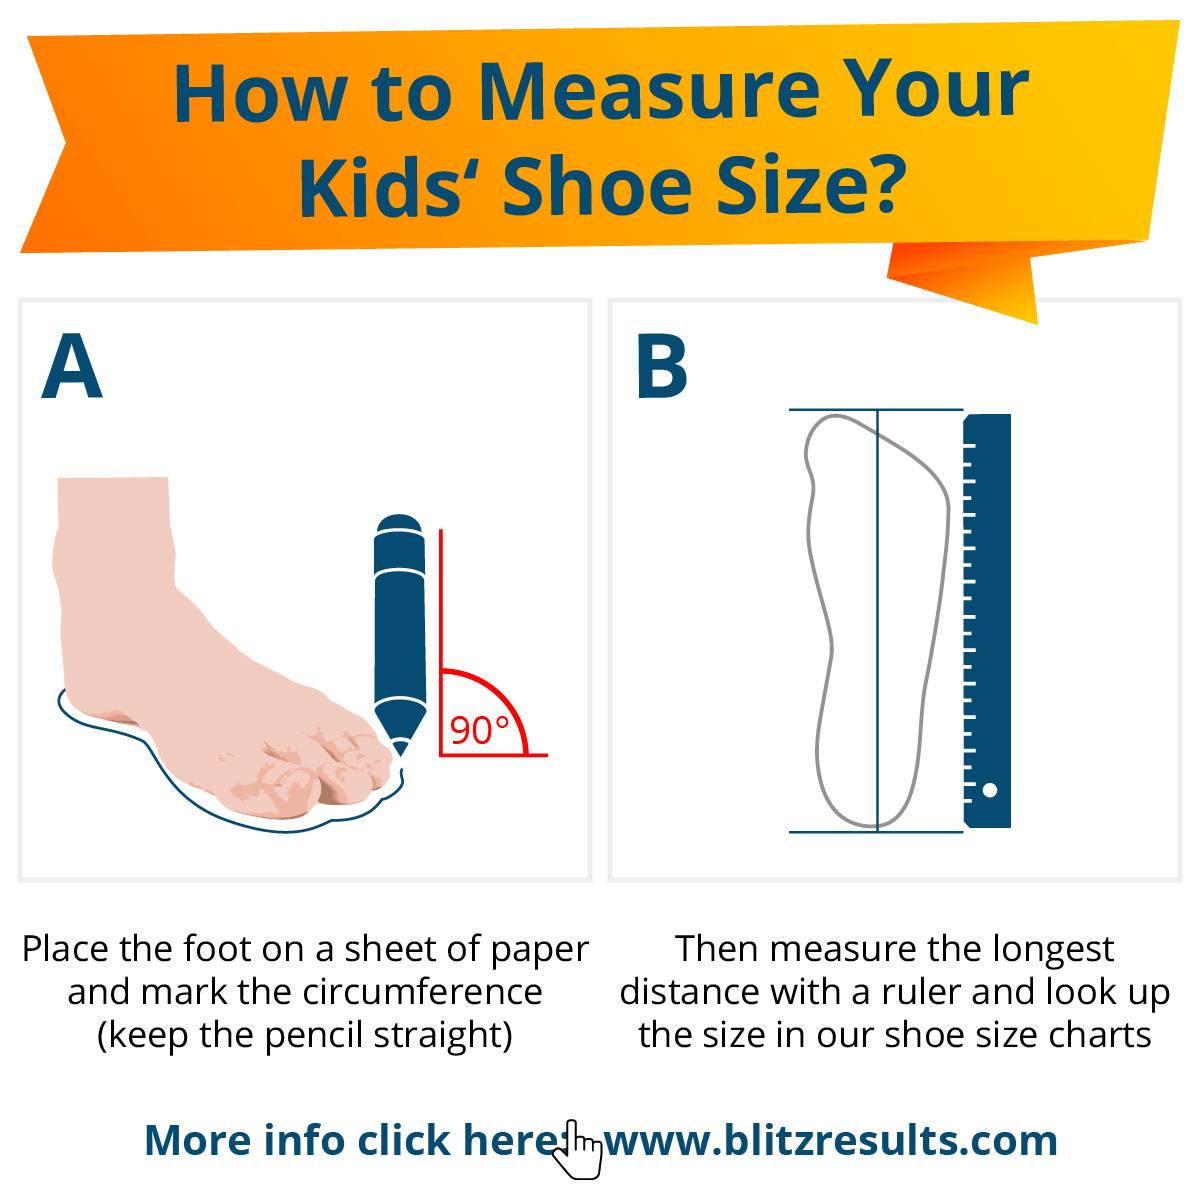 How to Measure Shoe Size at Home Easily